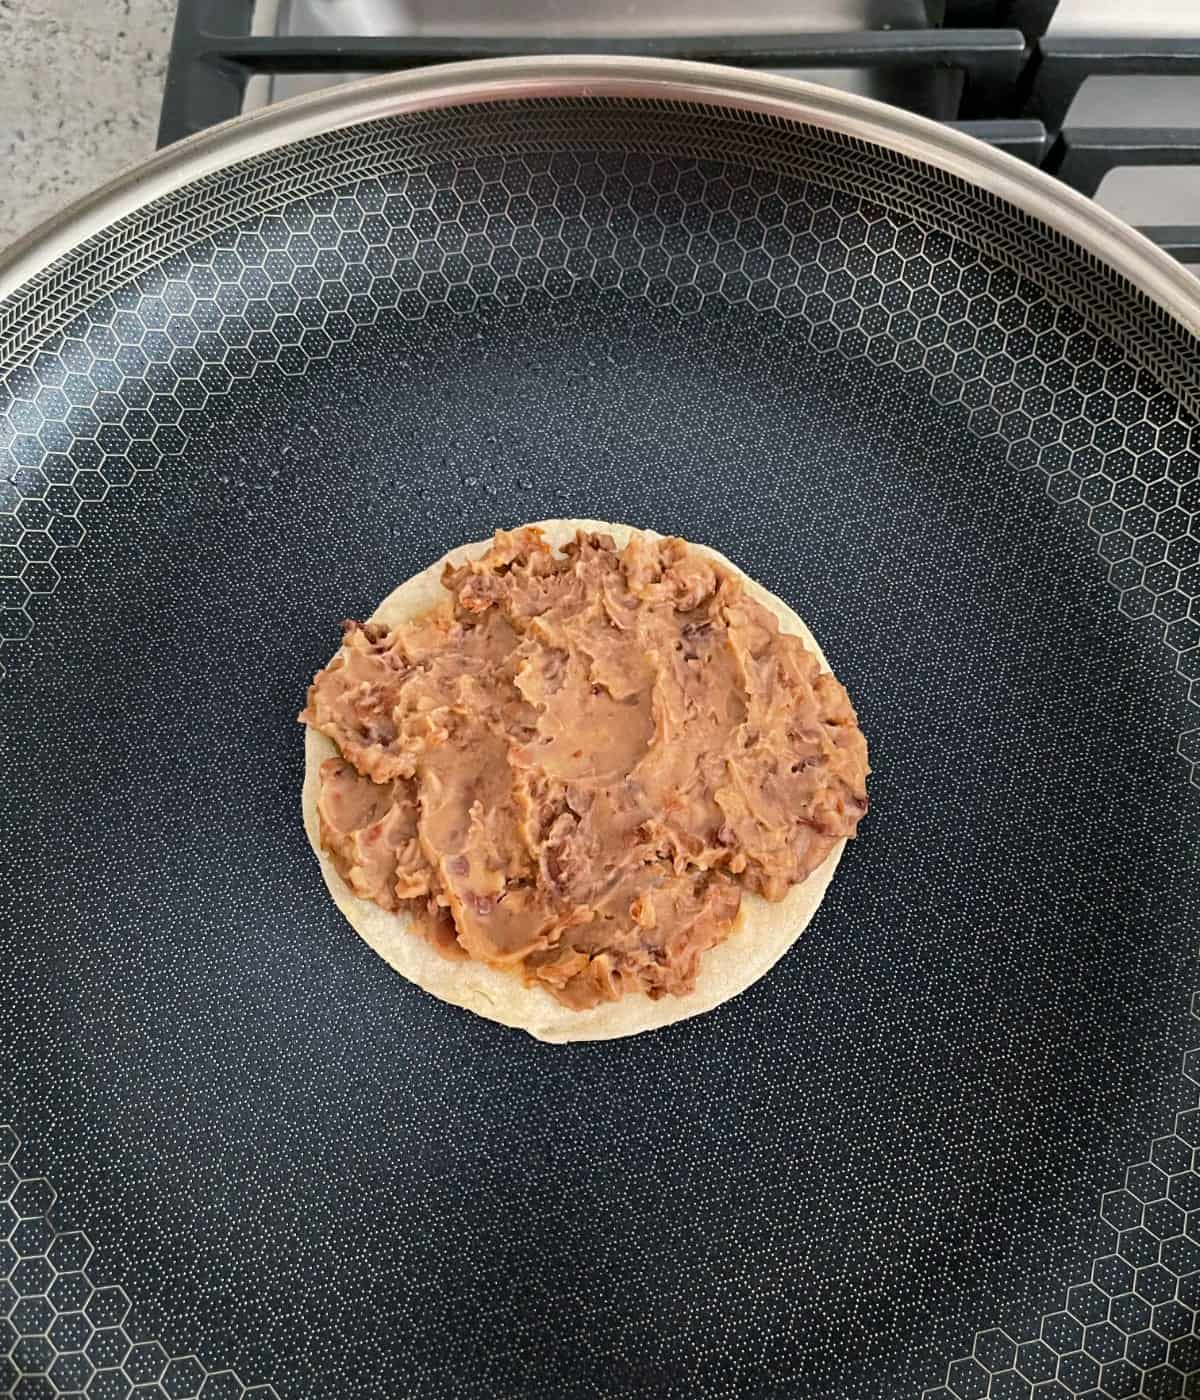 Heating tortilla spread with refried beans in skillet.